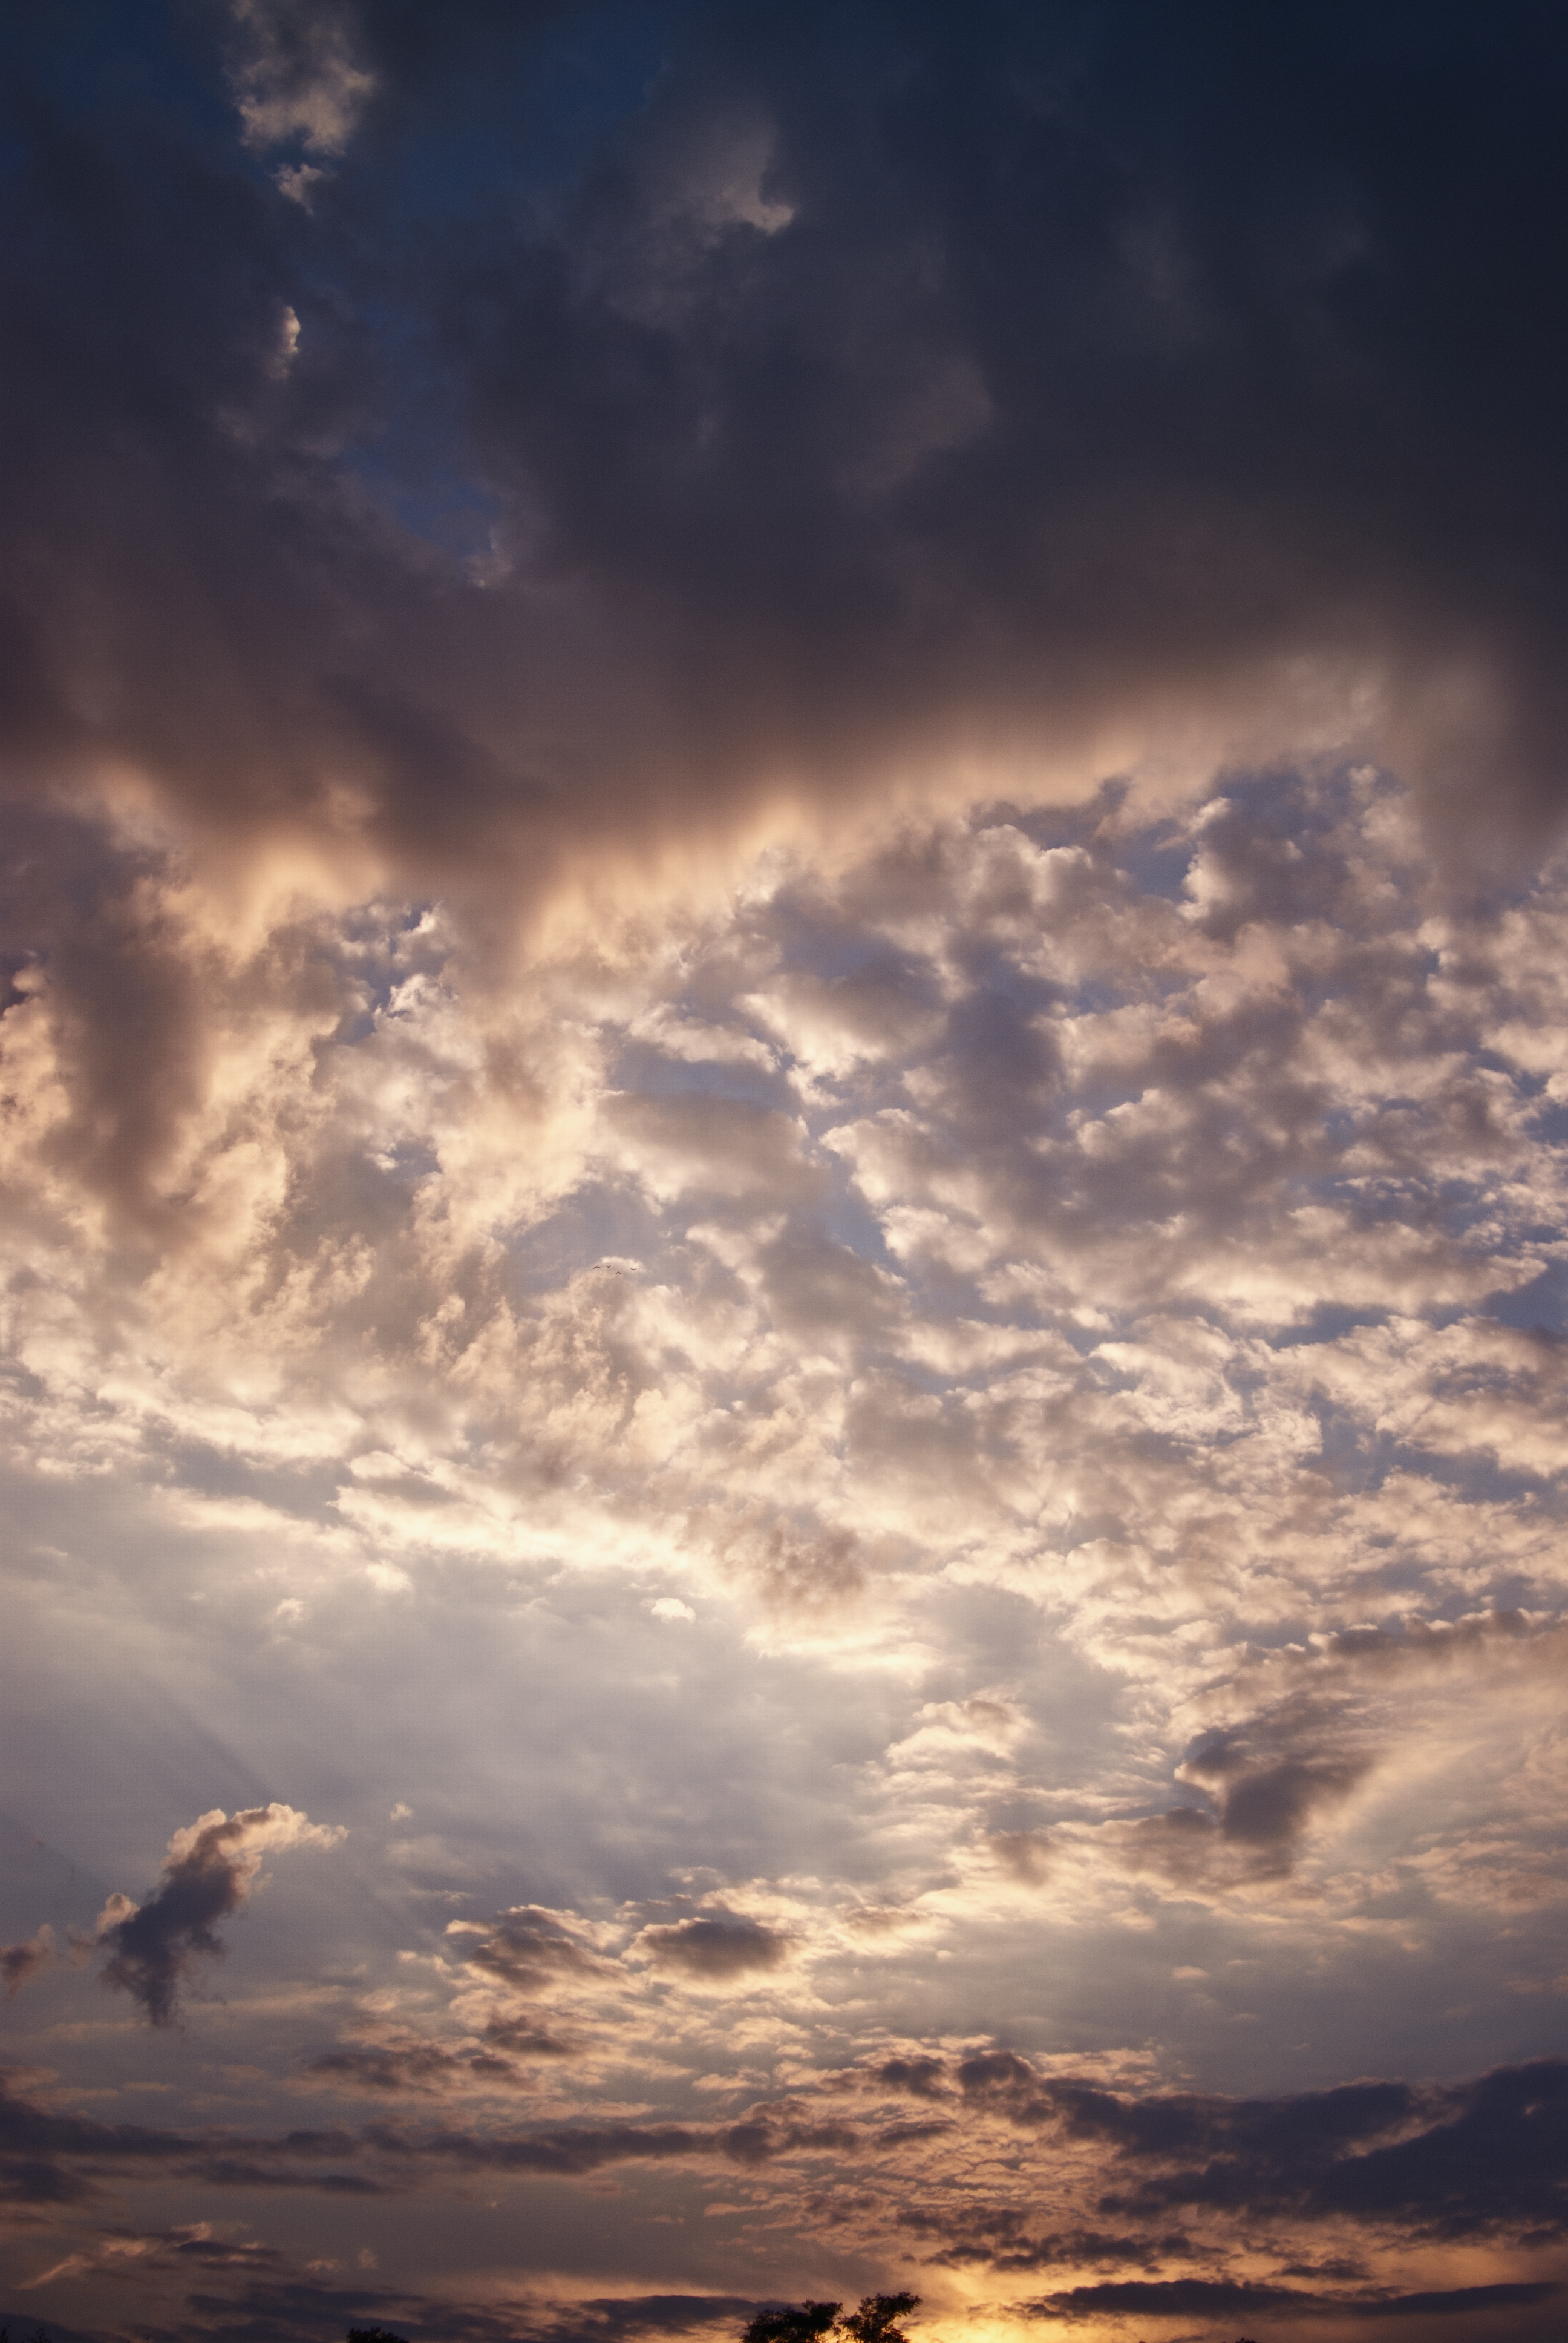 android clouds, nature, sunset, sky, evening, cloudy